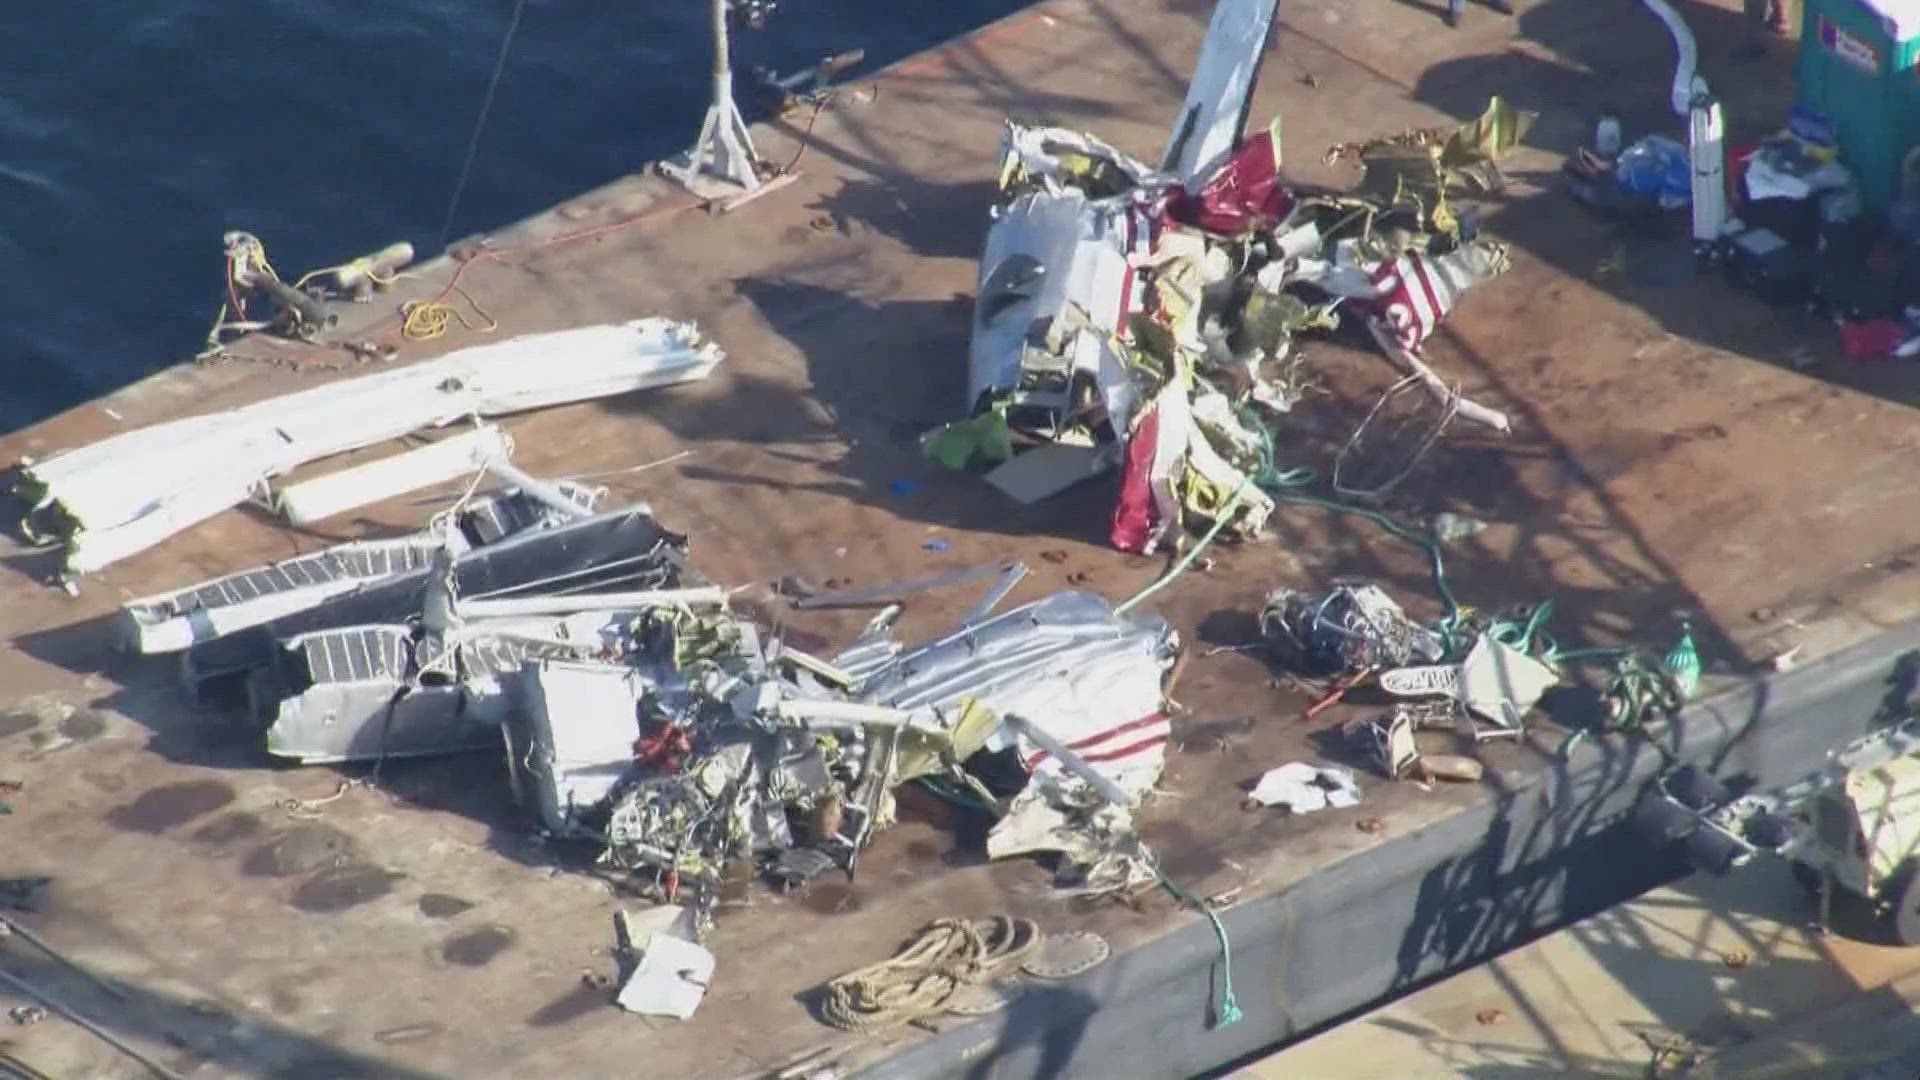 The NTSB chair said 80% of the plane wreckage had been recovered so far.